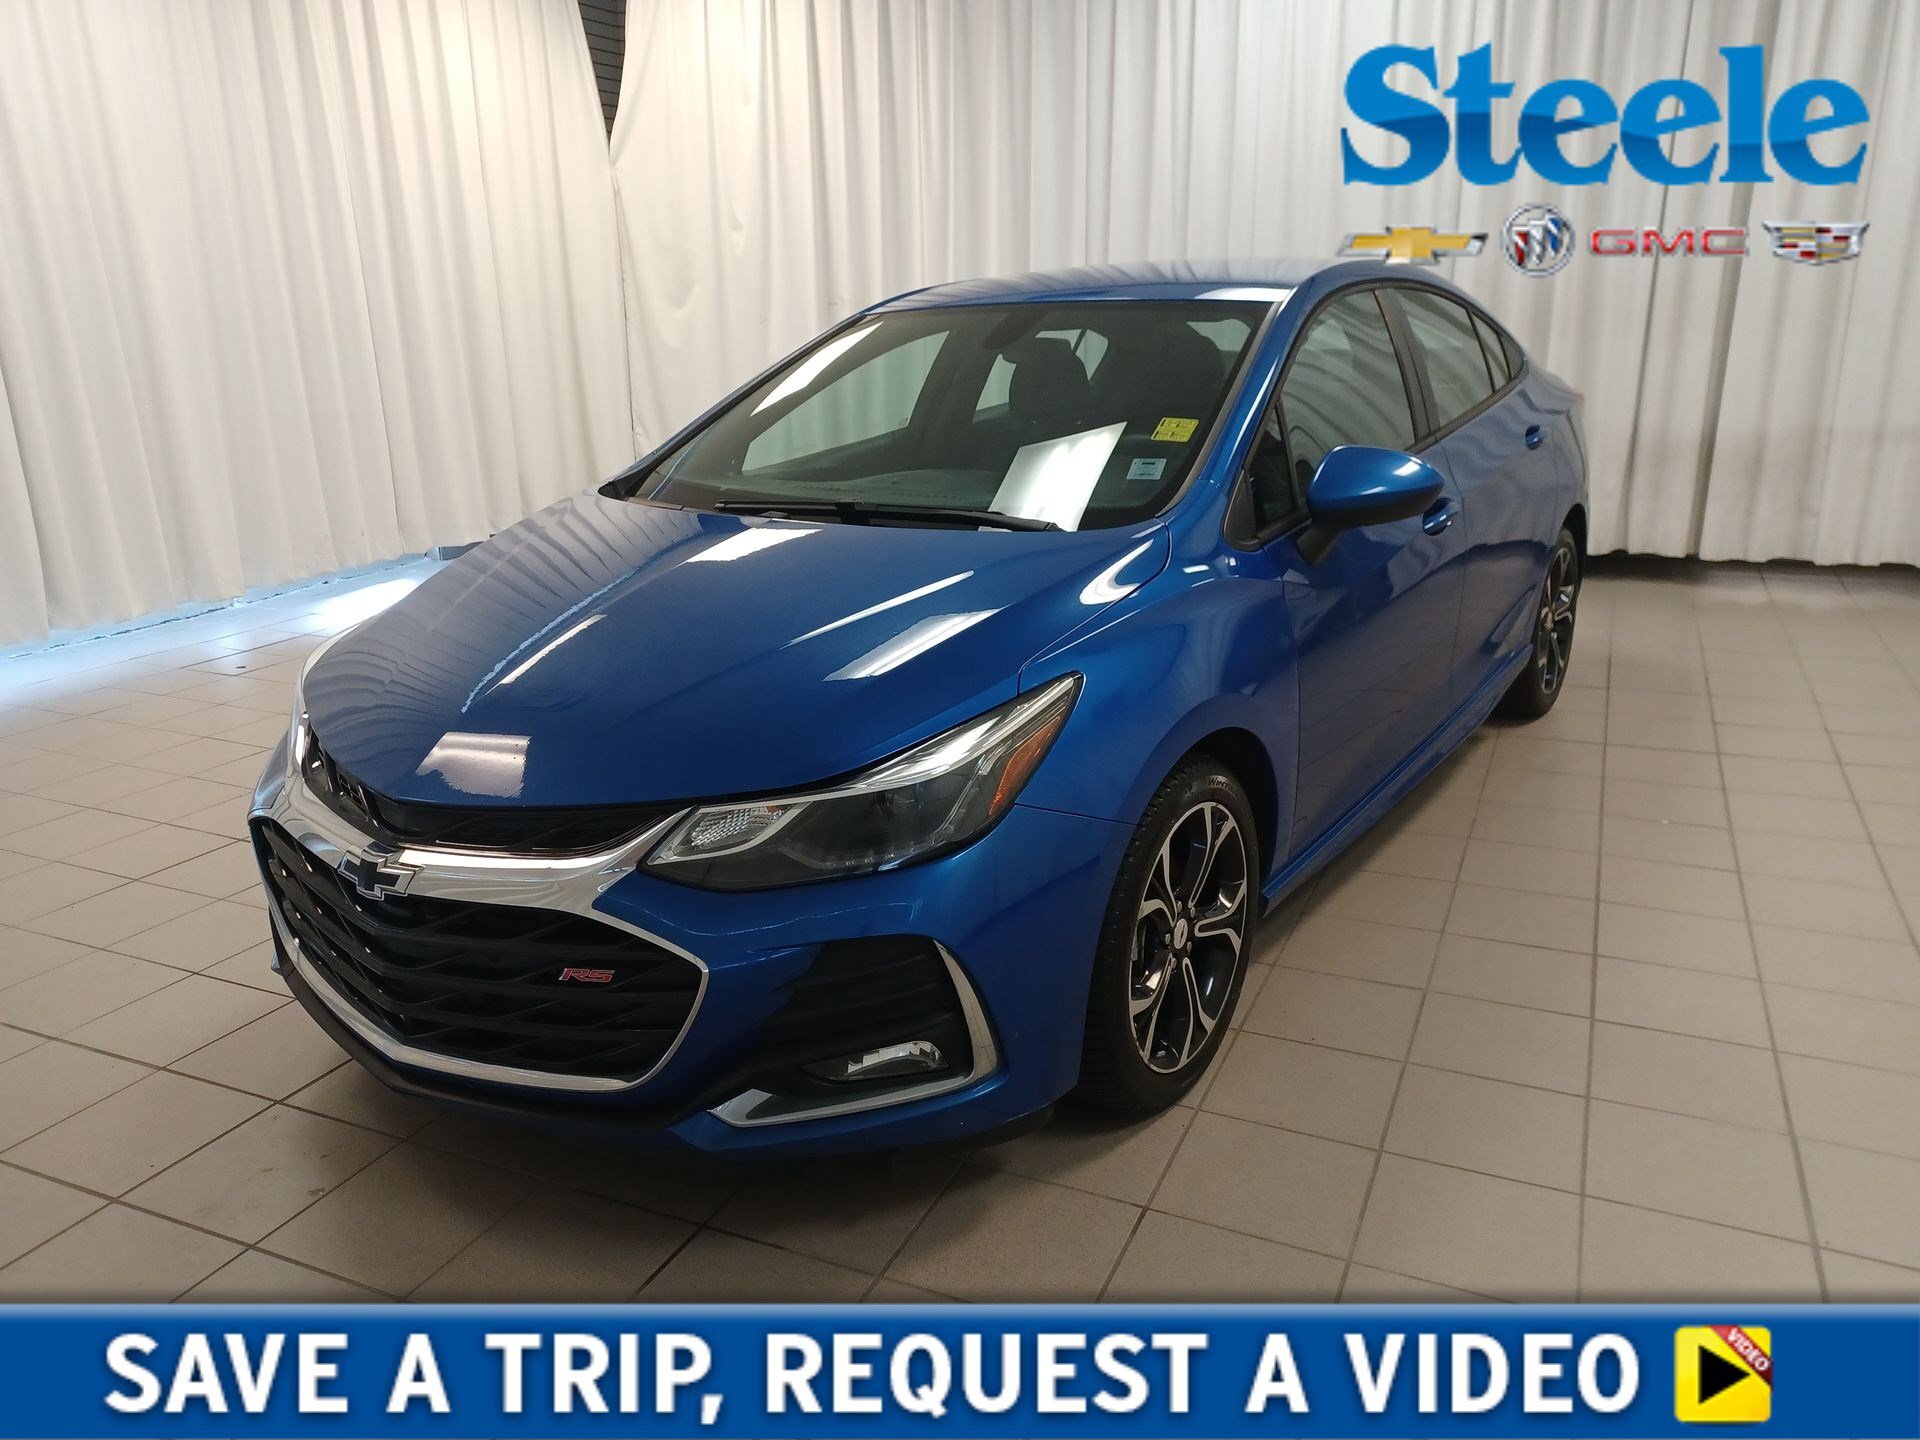 2019 Chevrolet Cruze LT RS Package *GM Certified*